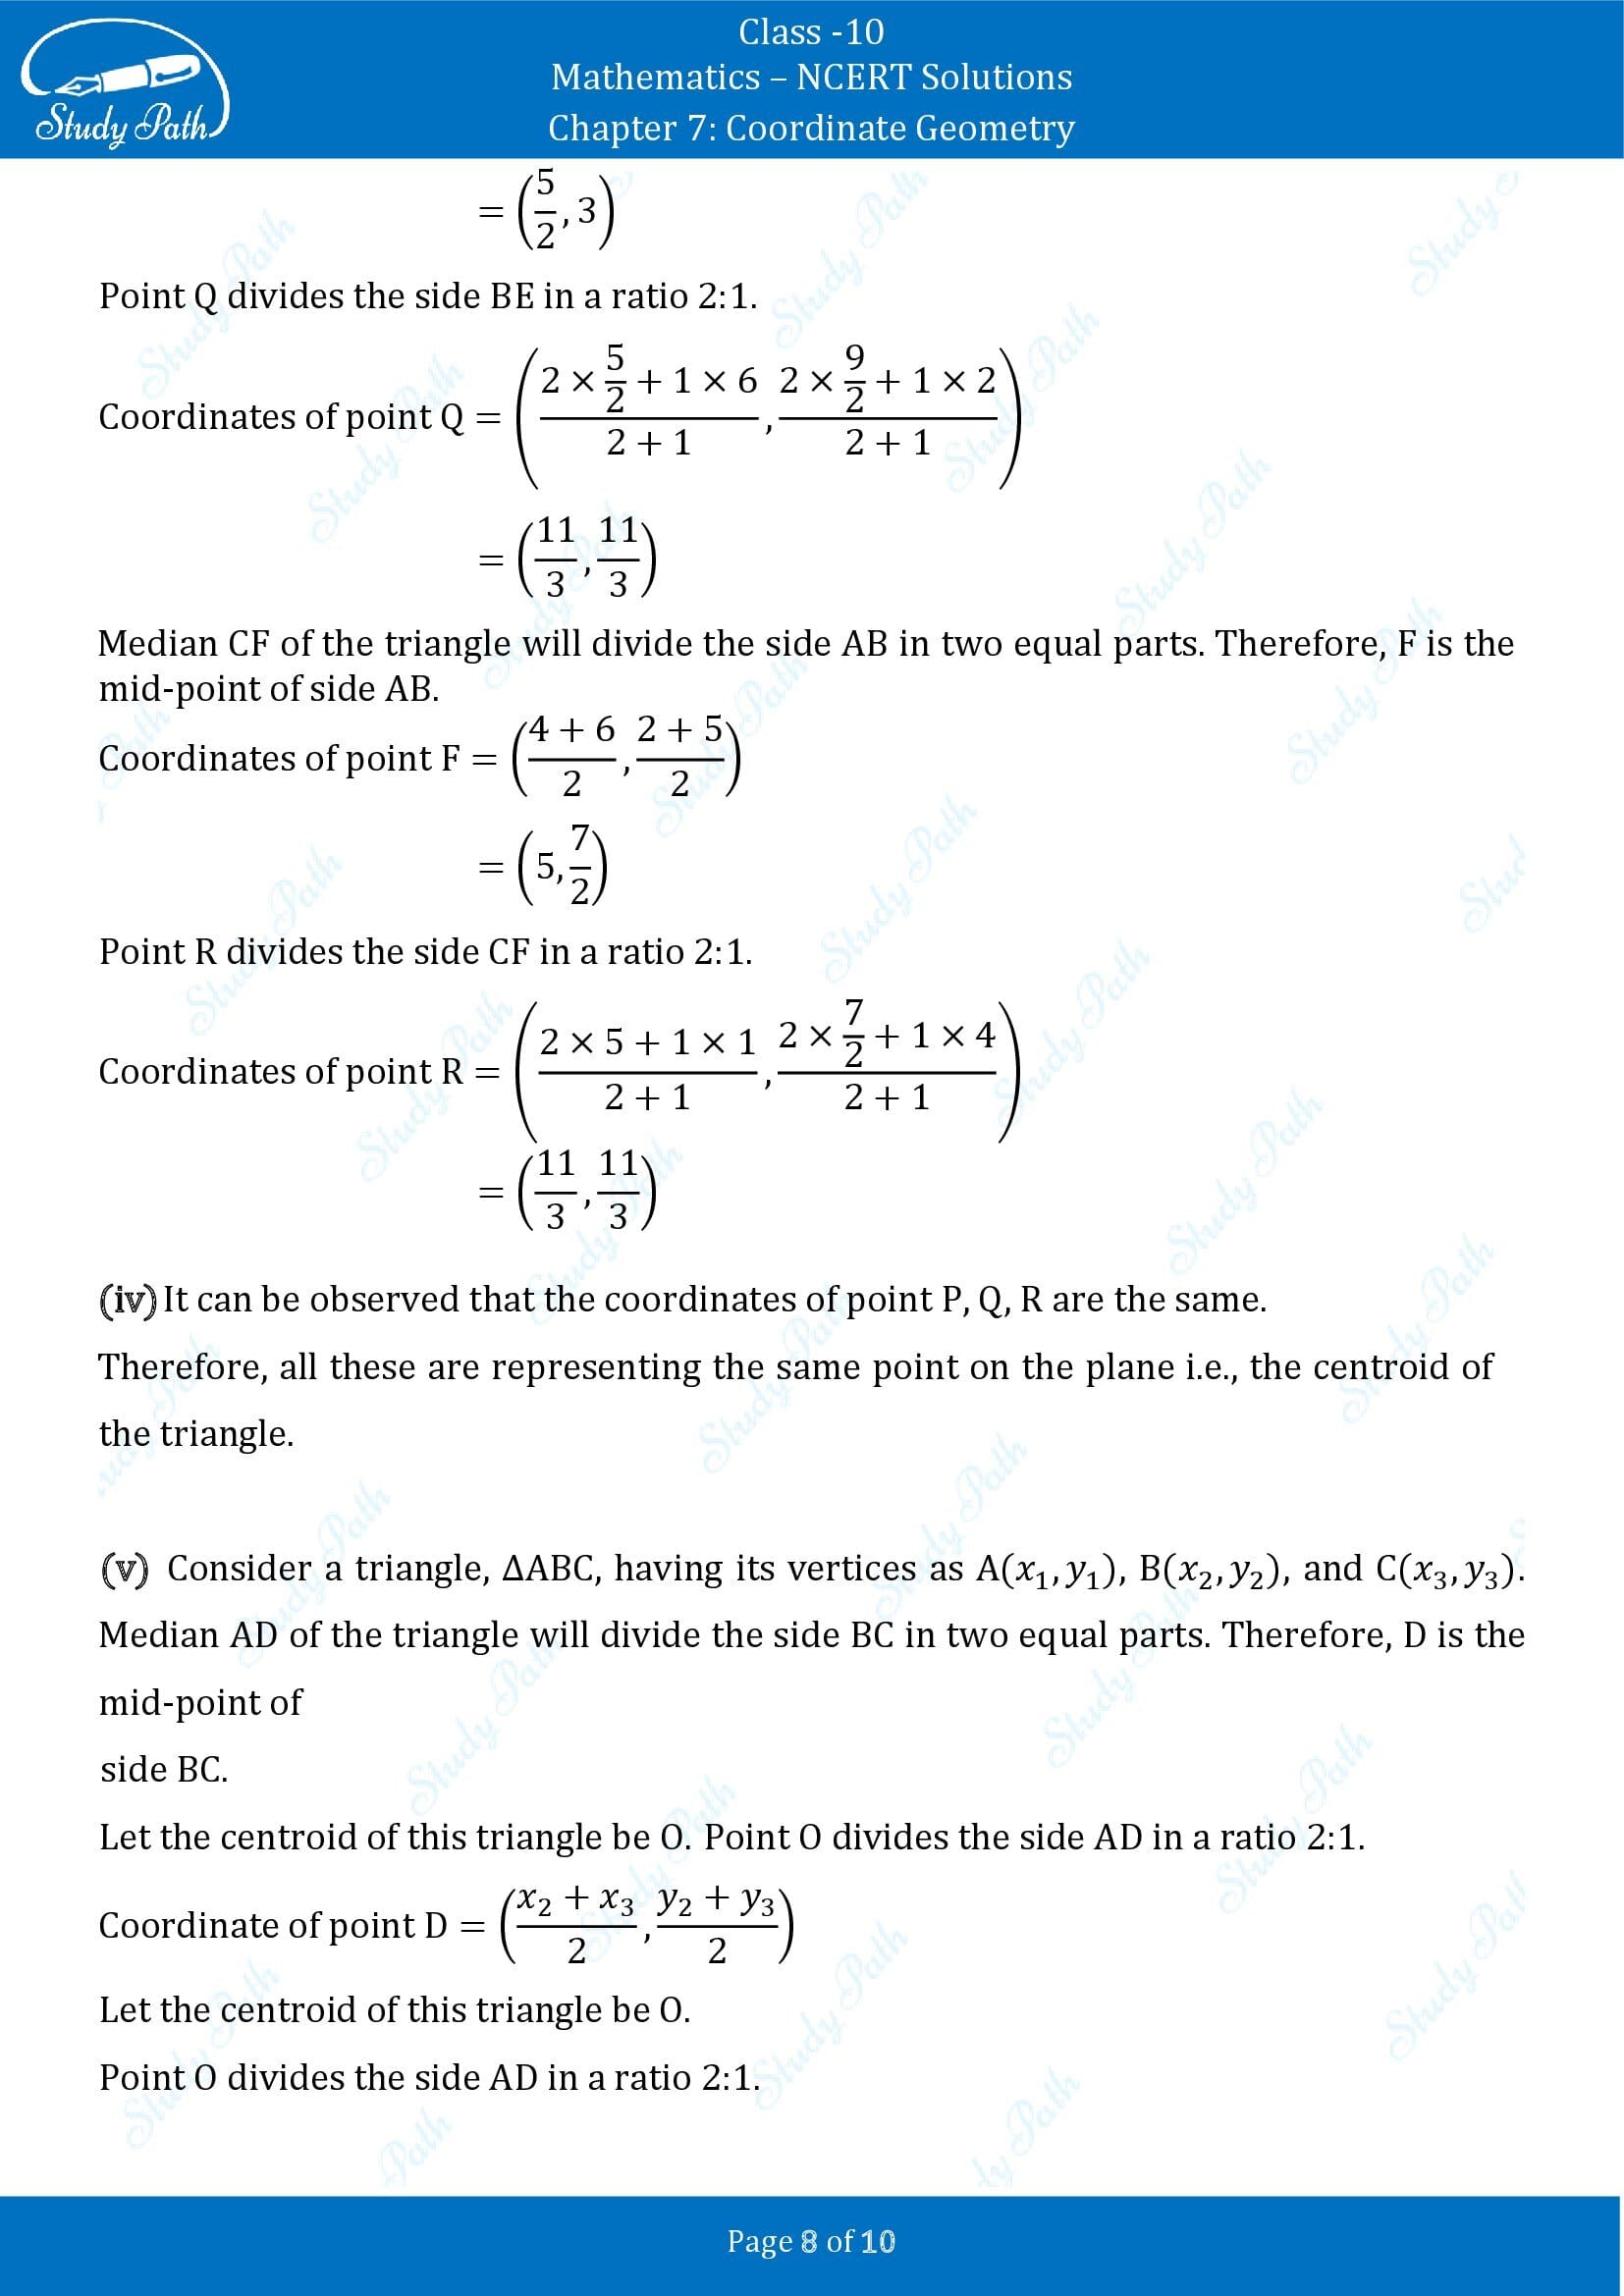 NCERT Solutions for Class 10 Maths Chapter 7 Coordinate Geometry Exercise 7.4 00008